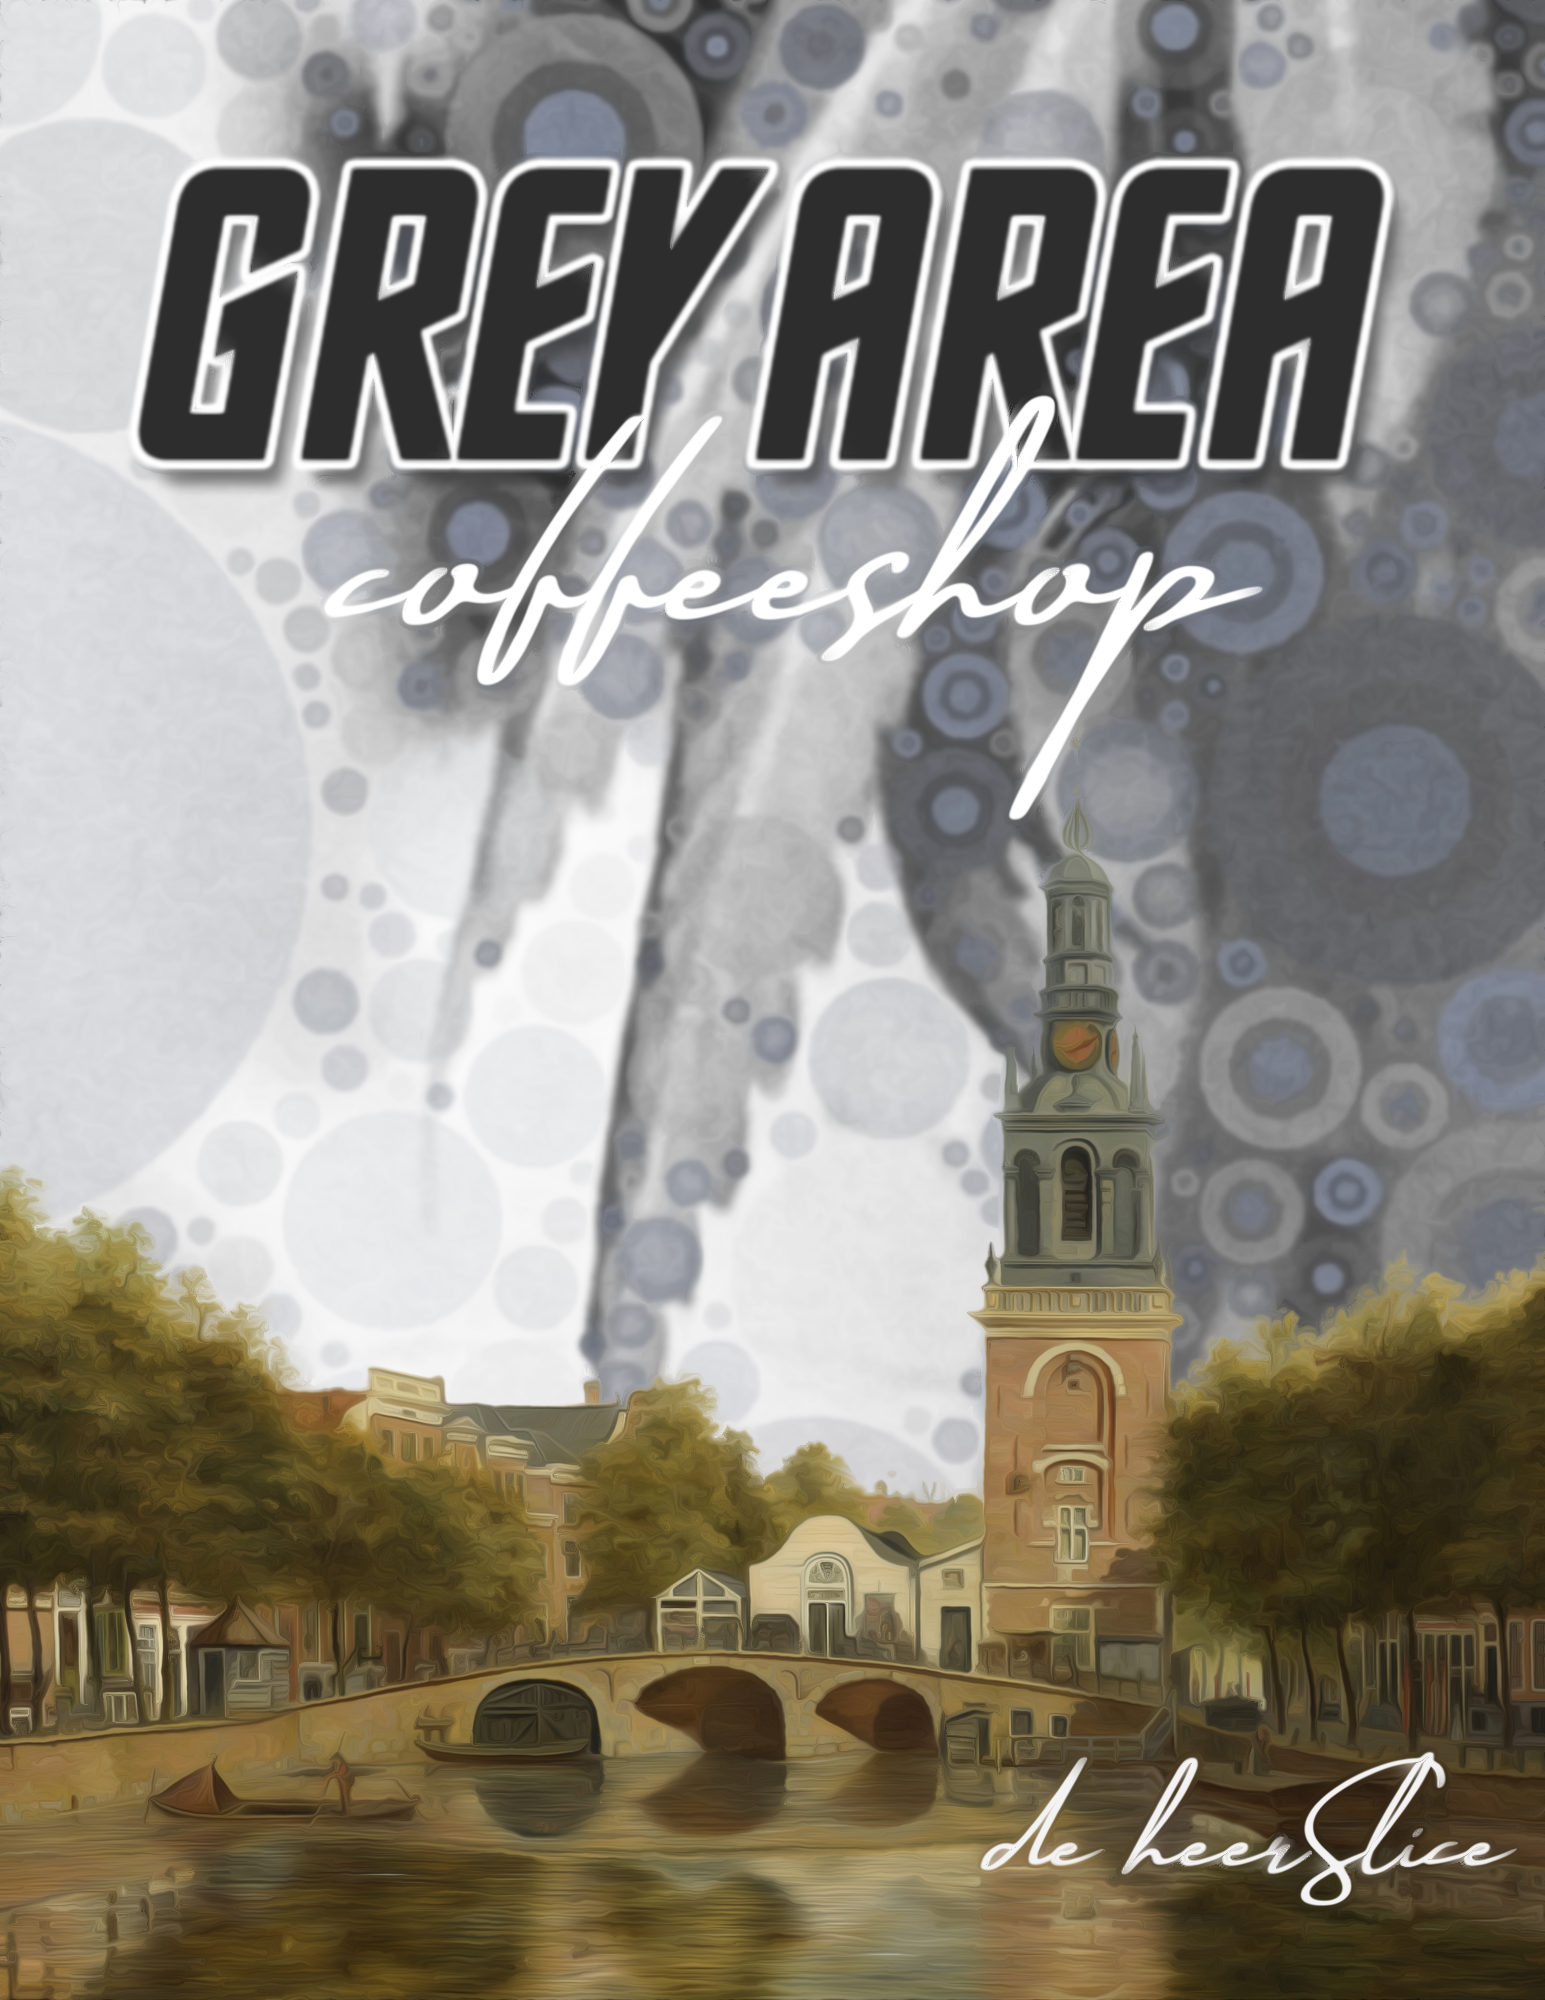 Grey Area Coffeeshop - Debut Novel from Leliestraat Press Available Now in Digital and Print Formats